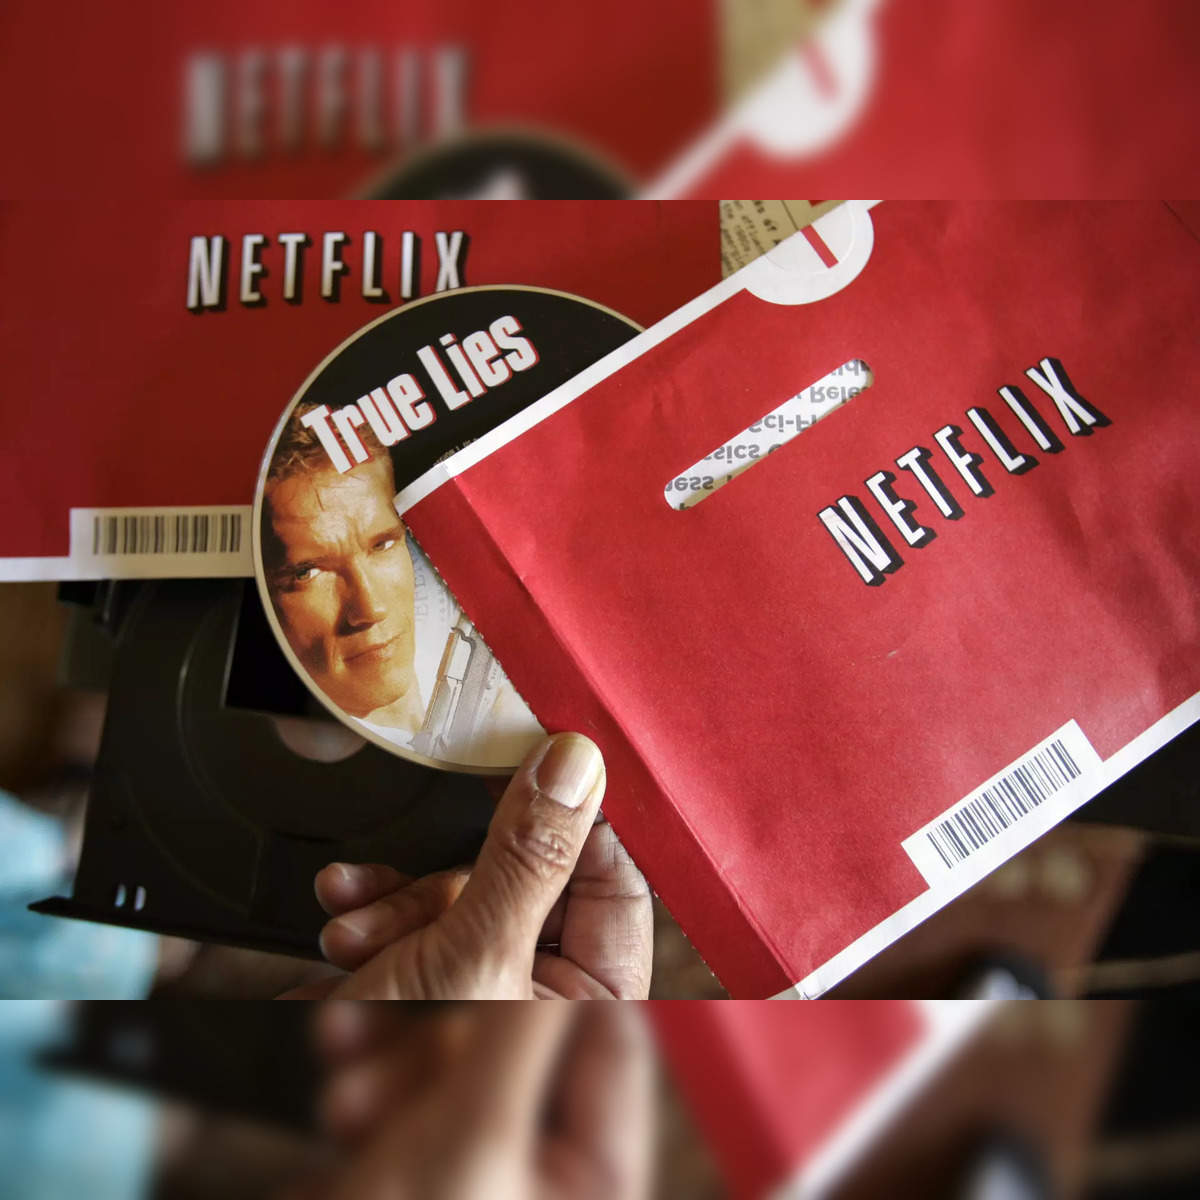 Netflix: A Case of Transformation for Video Streaming Service